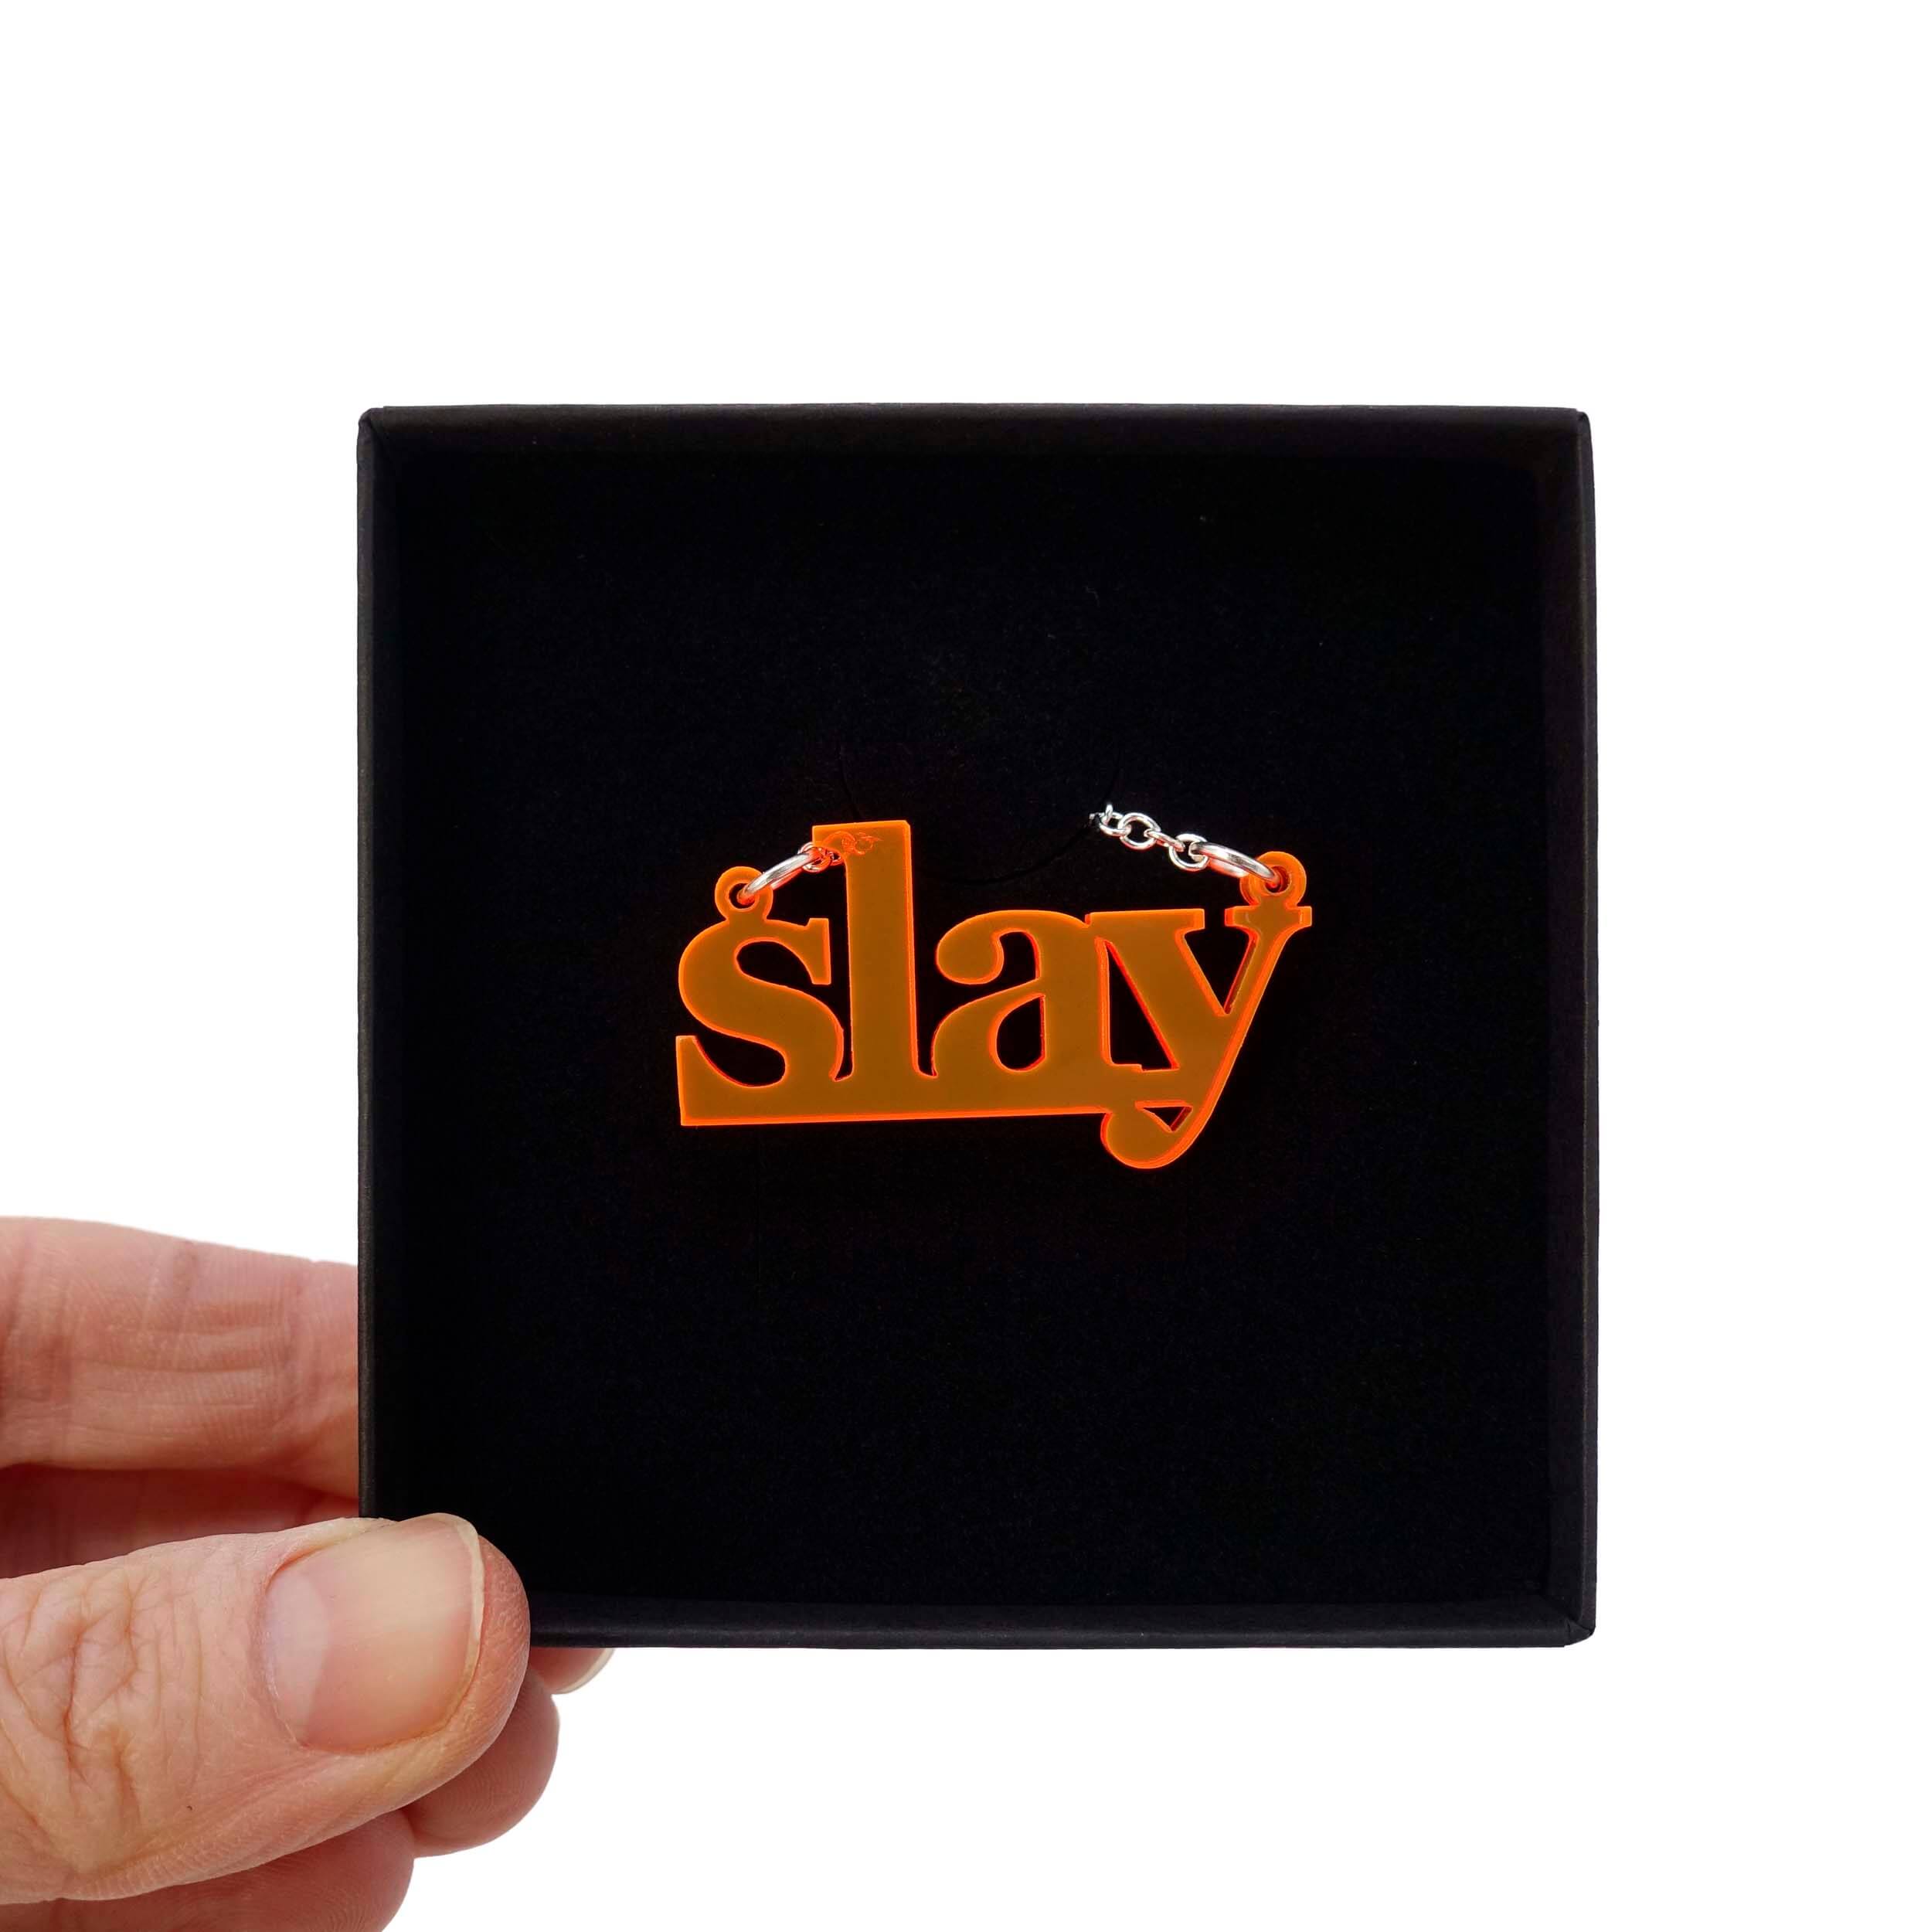 Fluorescent orange slay necklace shown being held up in a gift box. 